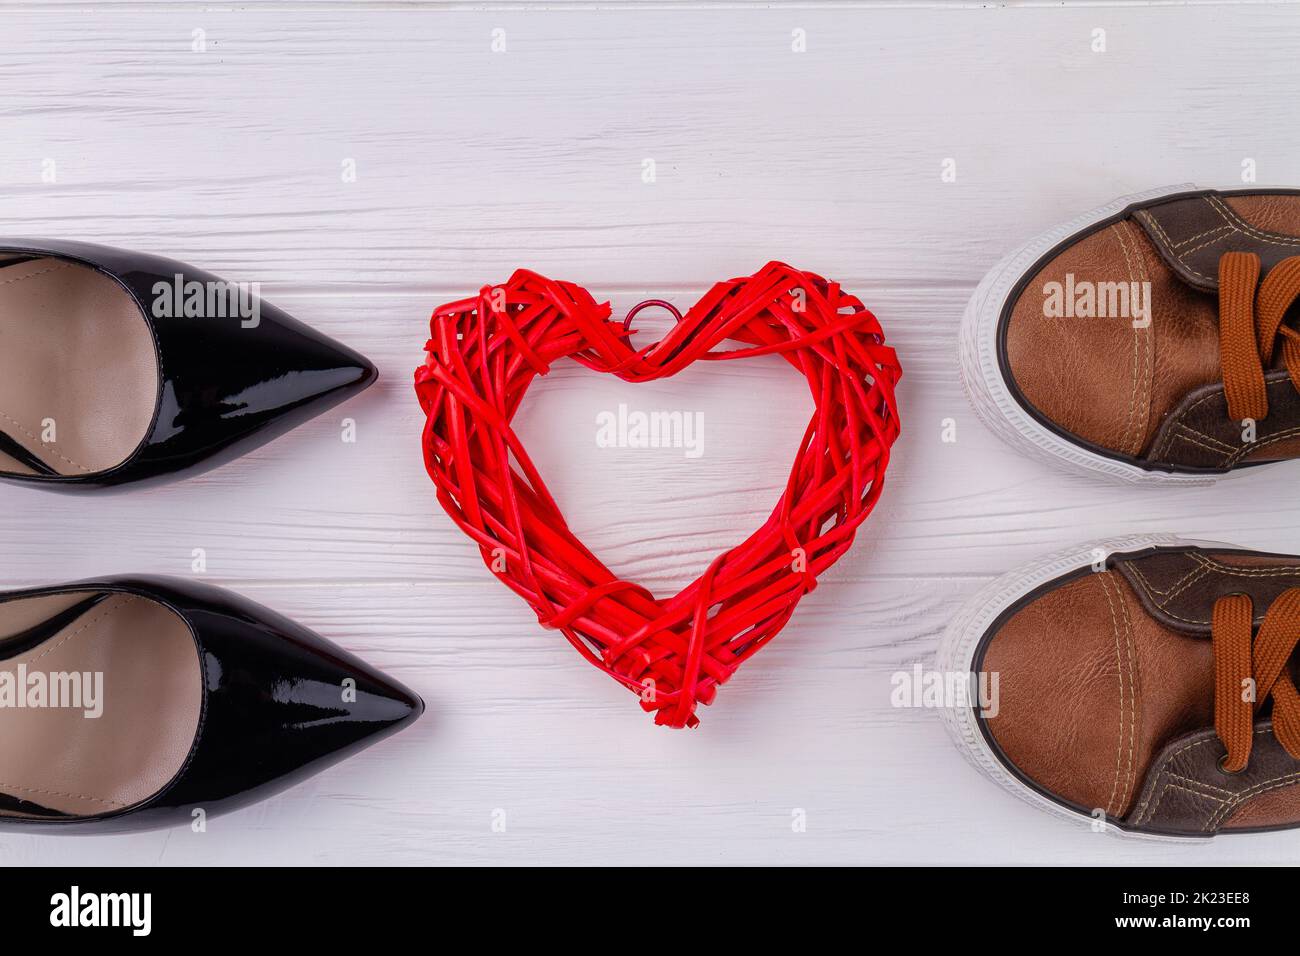 Male and female shoes and red heart. White wooden desk background. Stock Photo